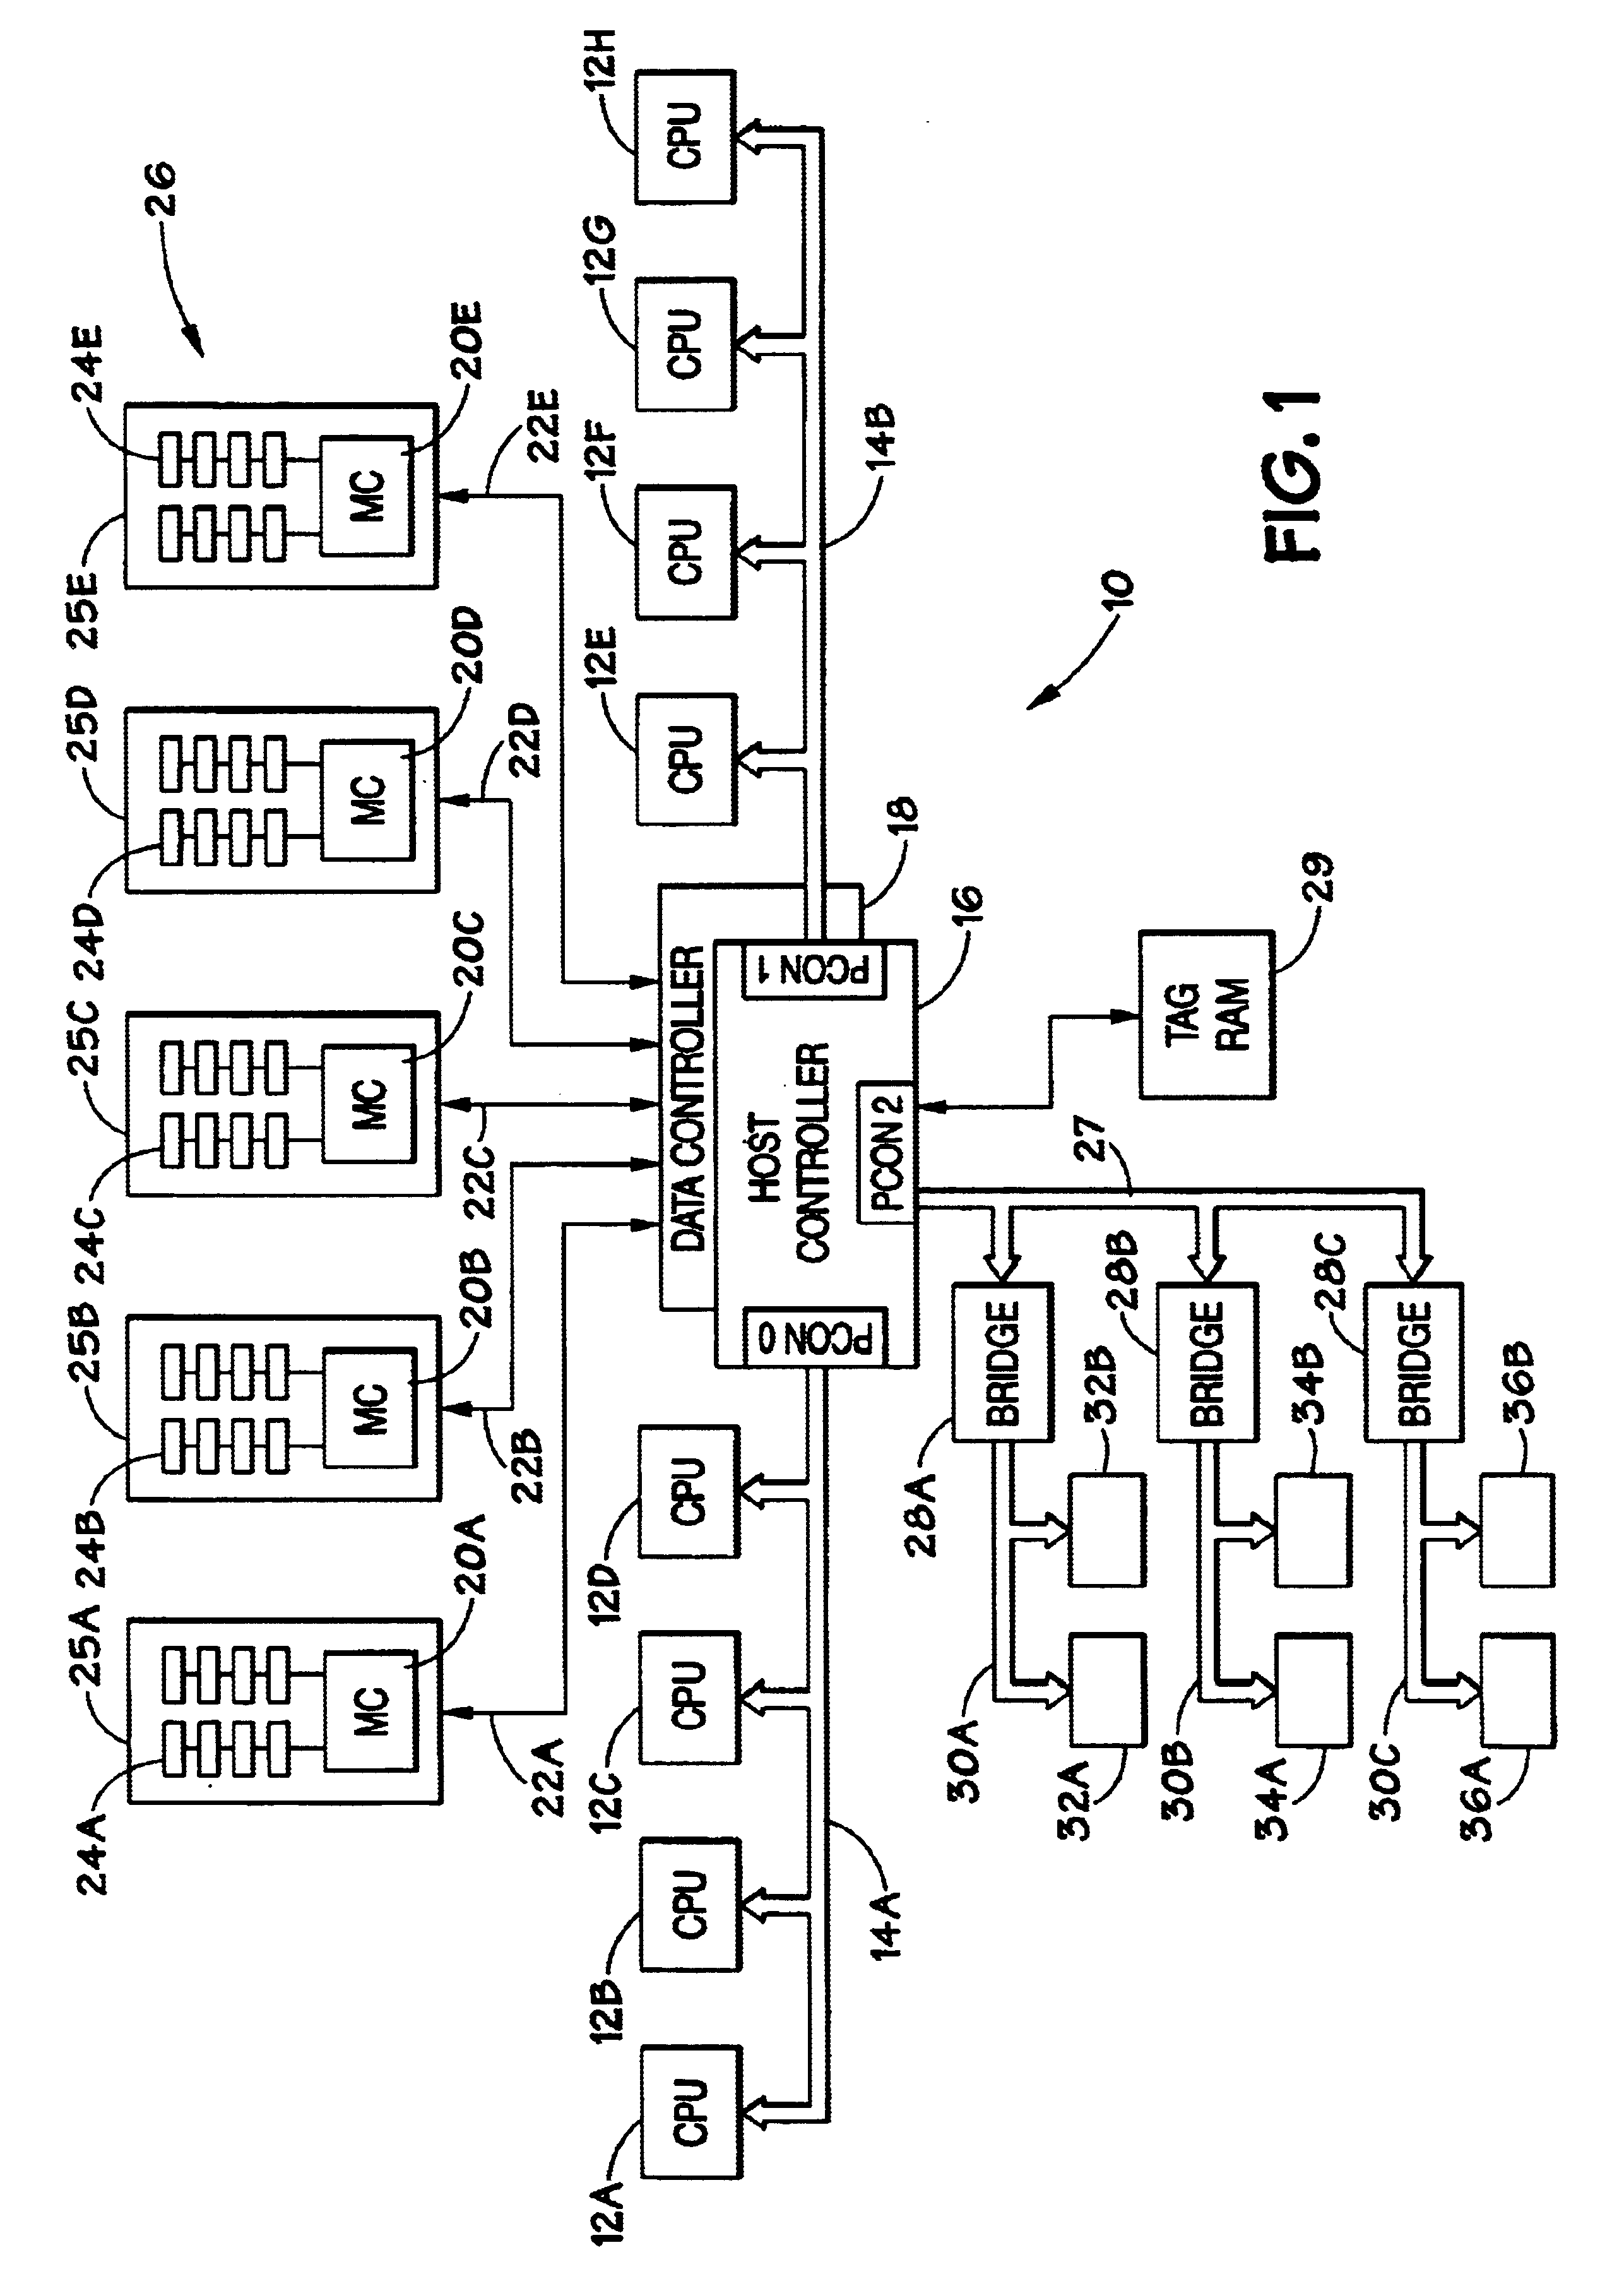 Coherency control module for maintaining cache coherency in a multi-processor-bus system